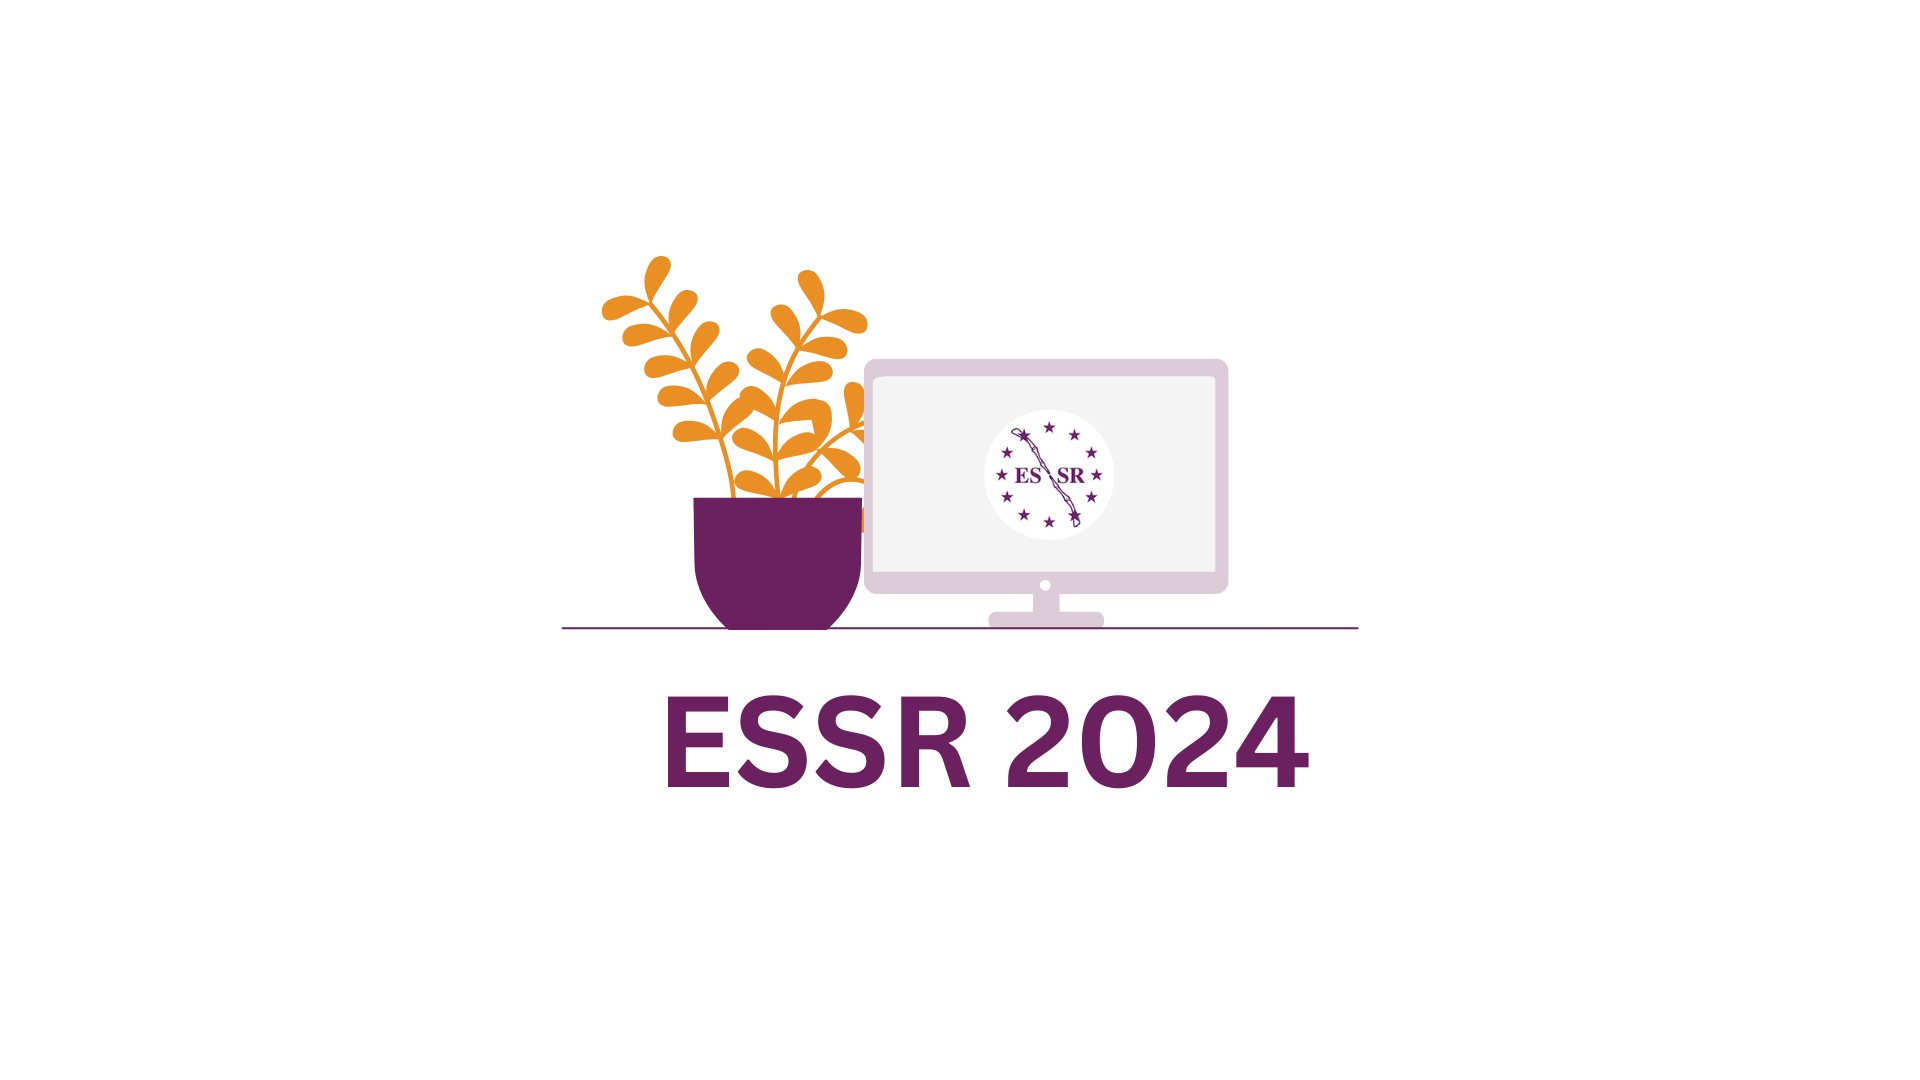 - We look forward to welcoming you to Lugano for the ESSR 2024